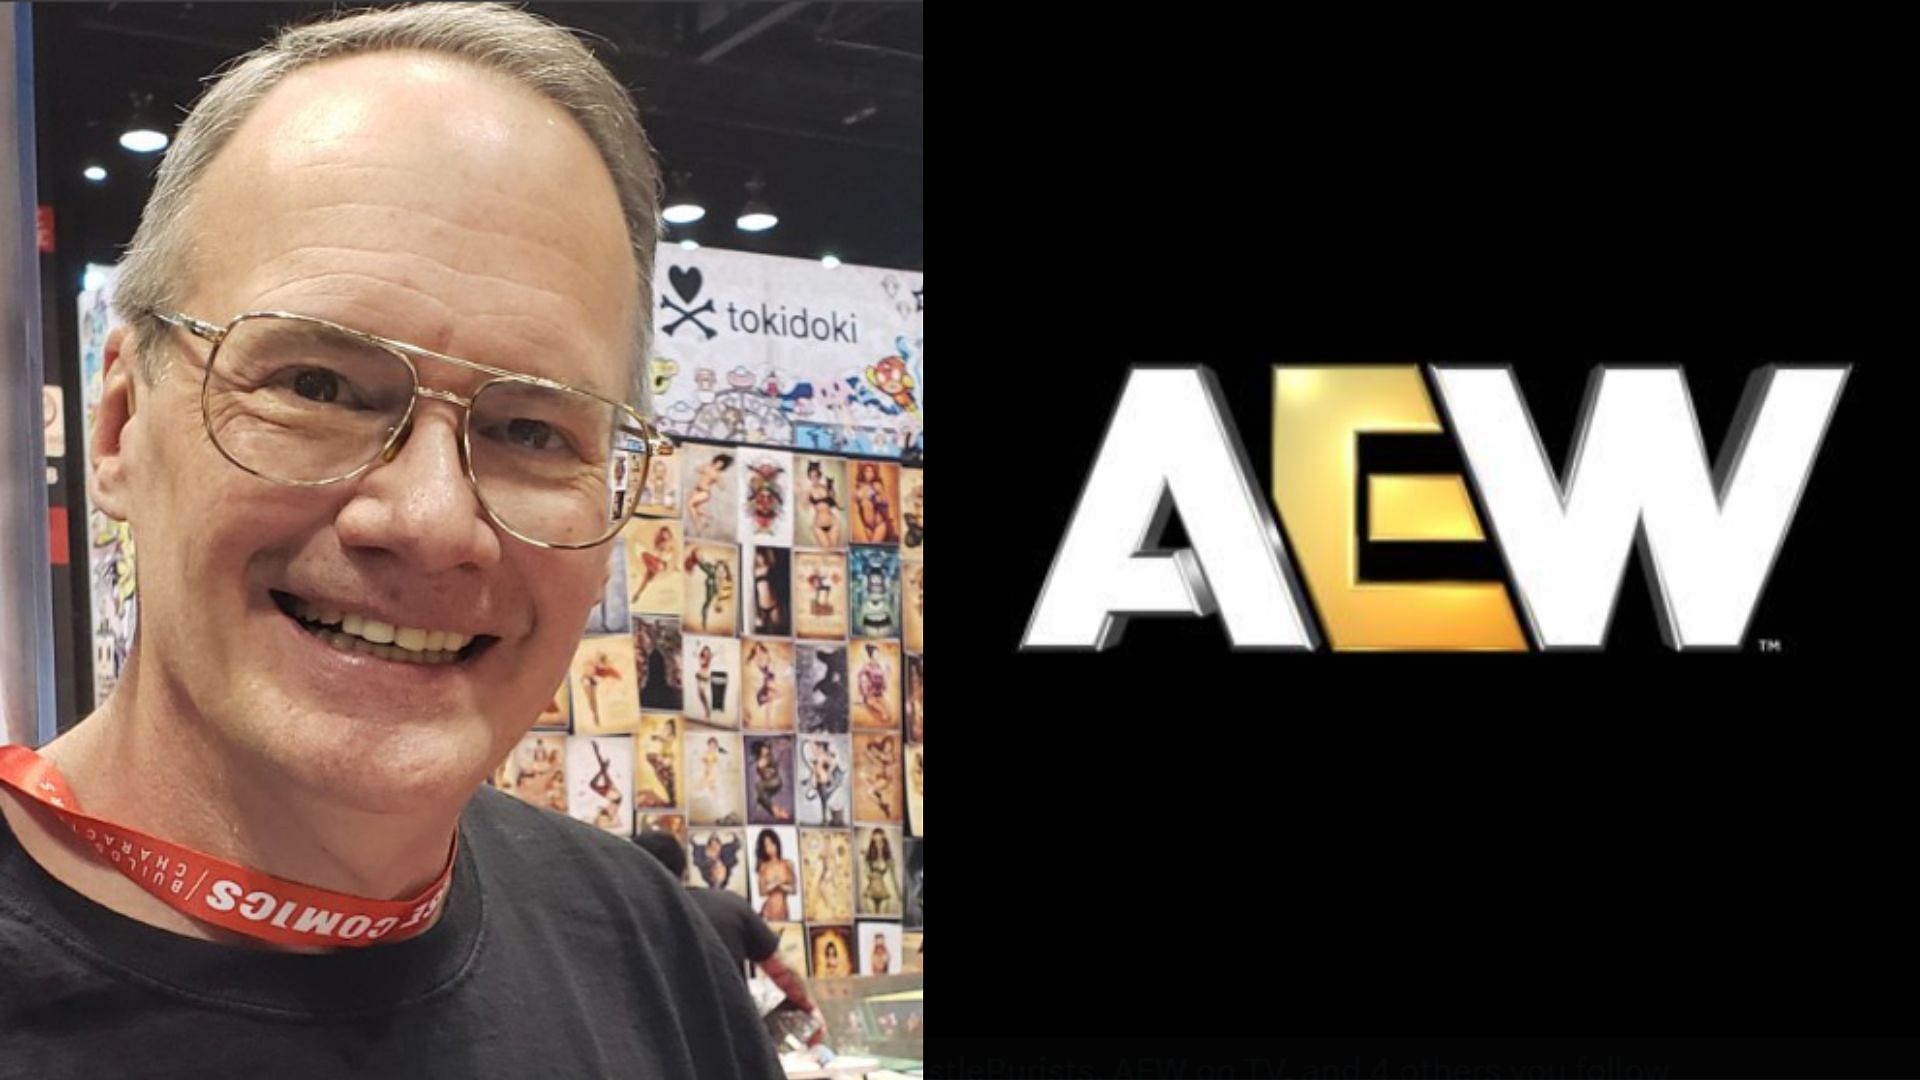 Jim Cornette is a former wrestling promoter and booker [Image Credits: X profiles of AEW and Cornette]